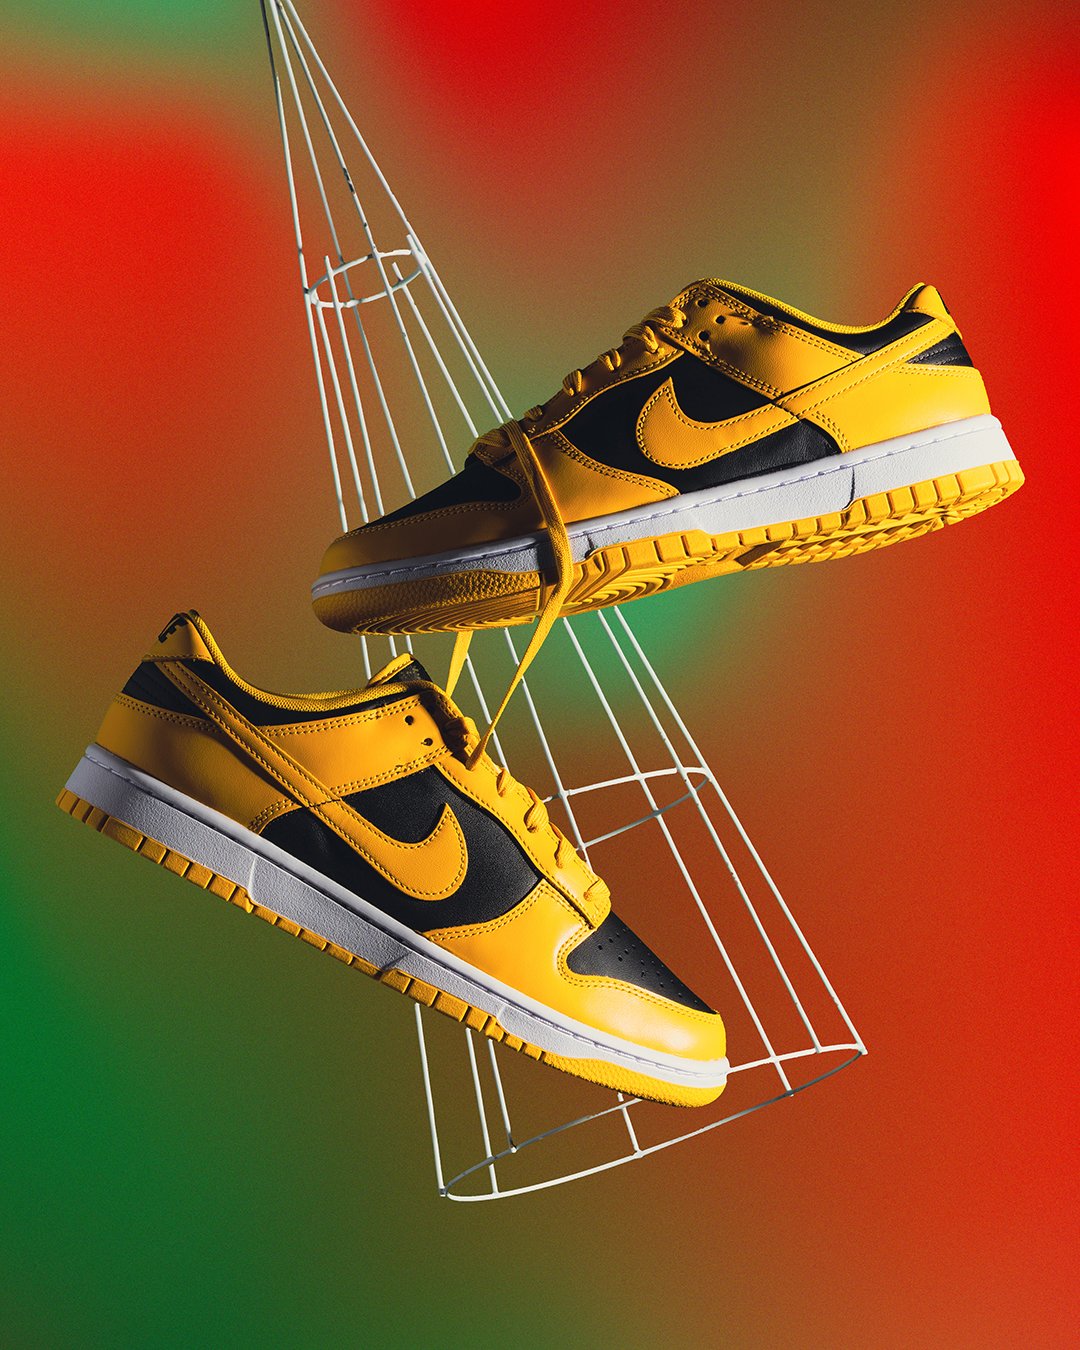 Foot Locker on Twitter: "Heritage color blocking for a classic feel. #Nike Dunk Low 'Goldenrod' launches 12.16 Reservations are open Ship to Me and Store Pickup through the Foot Locker App. #